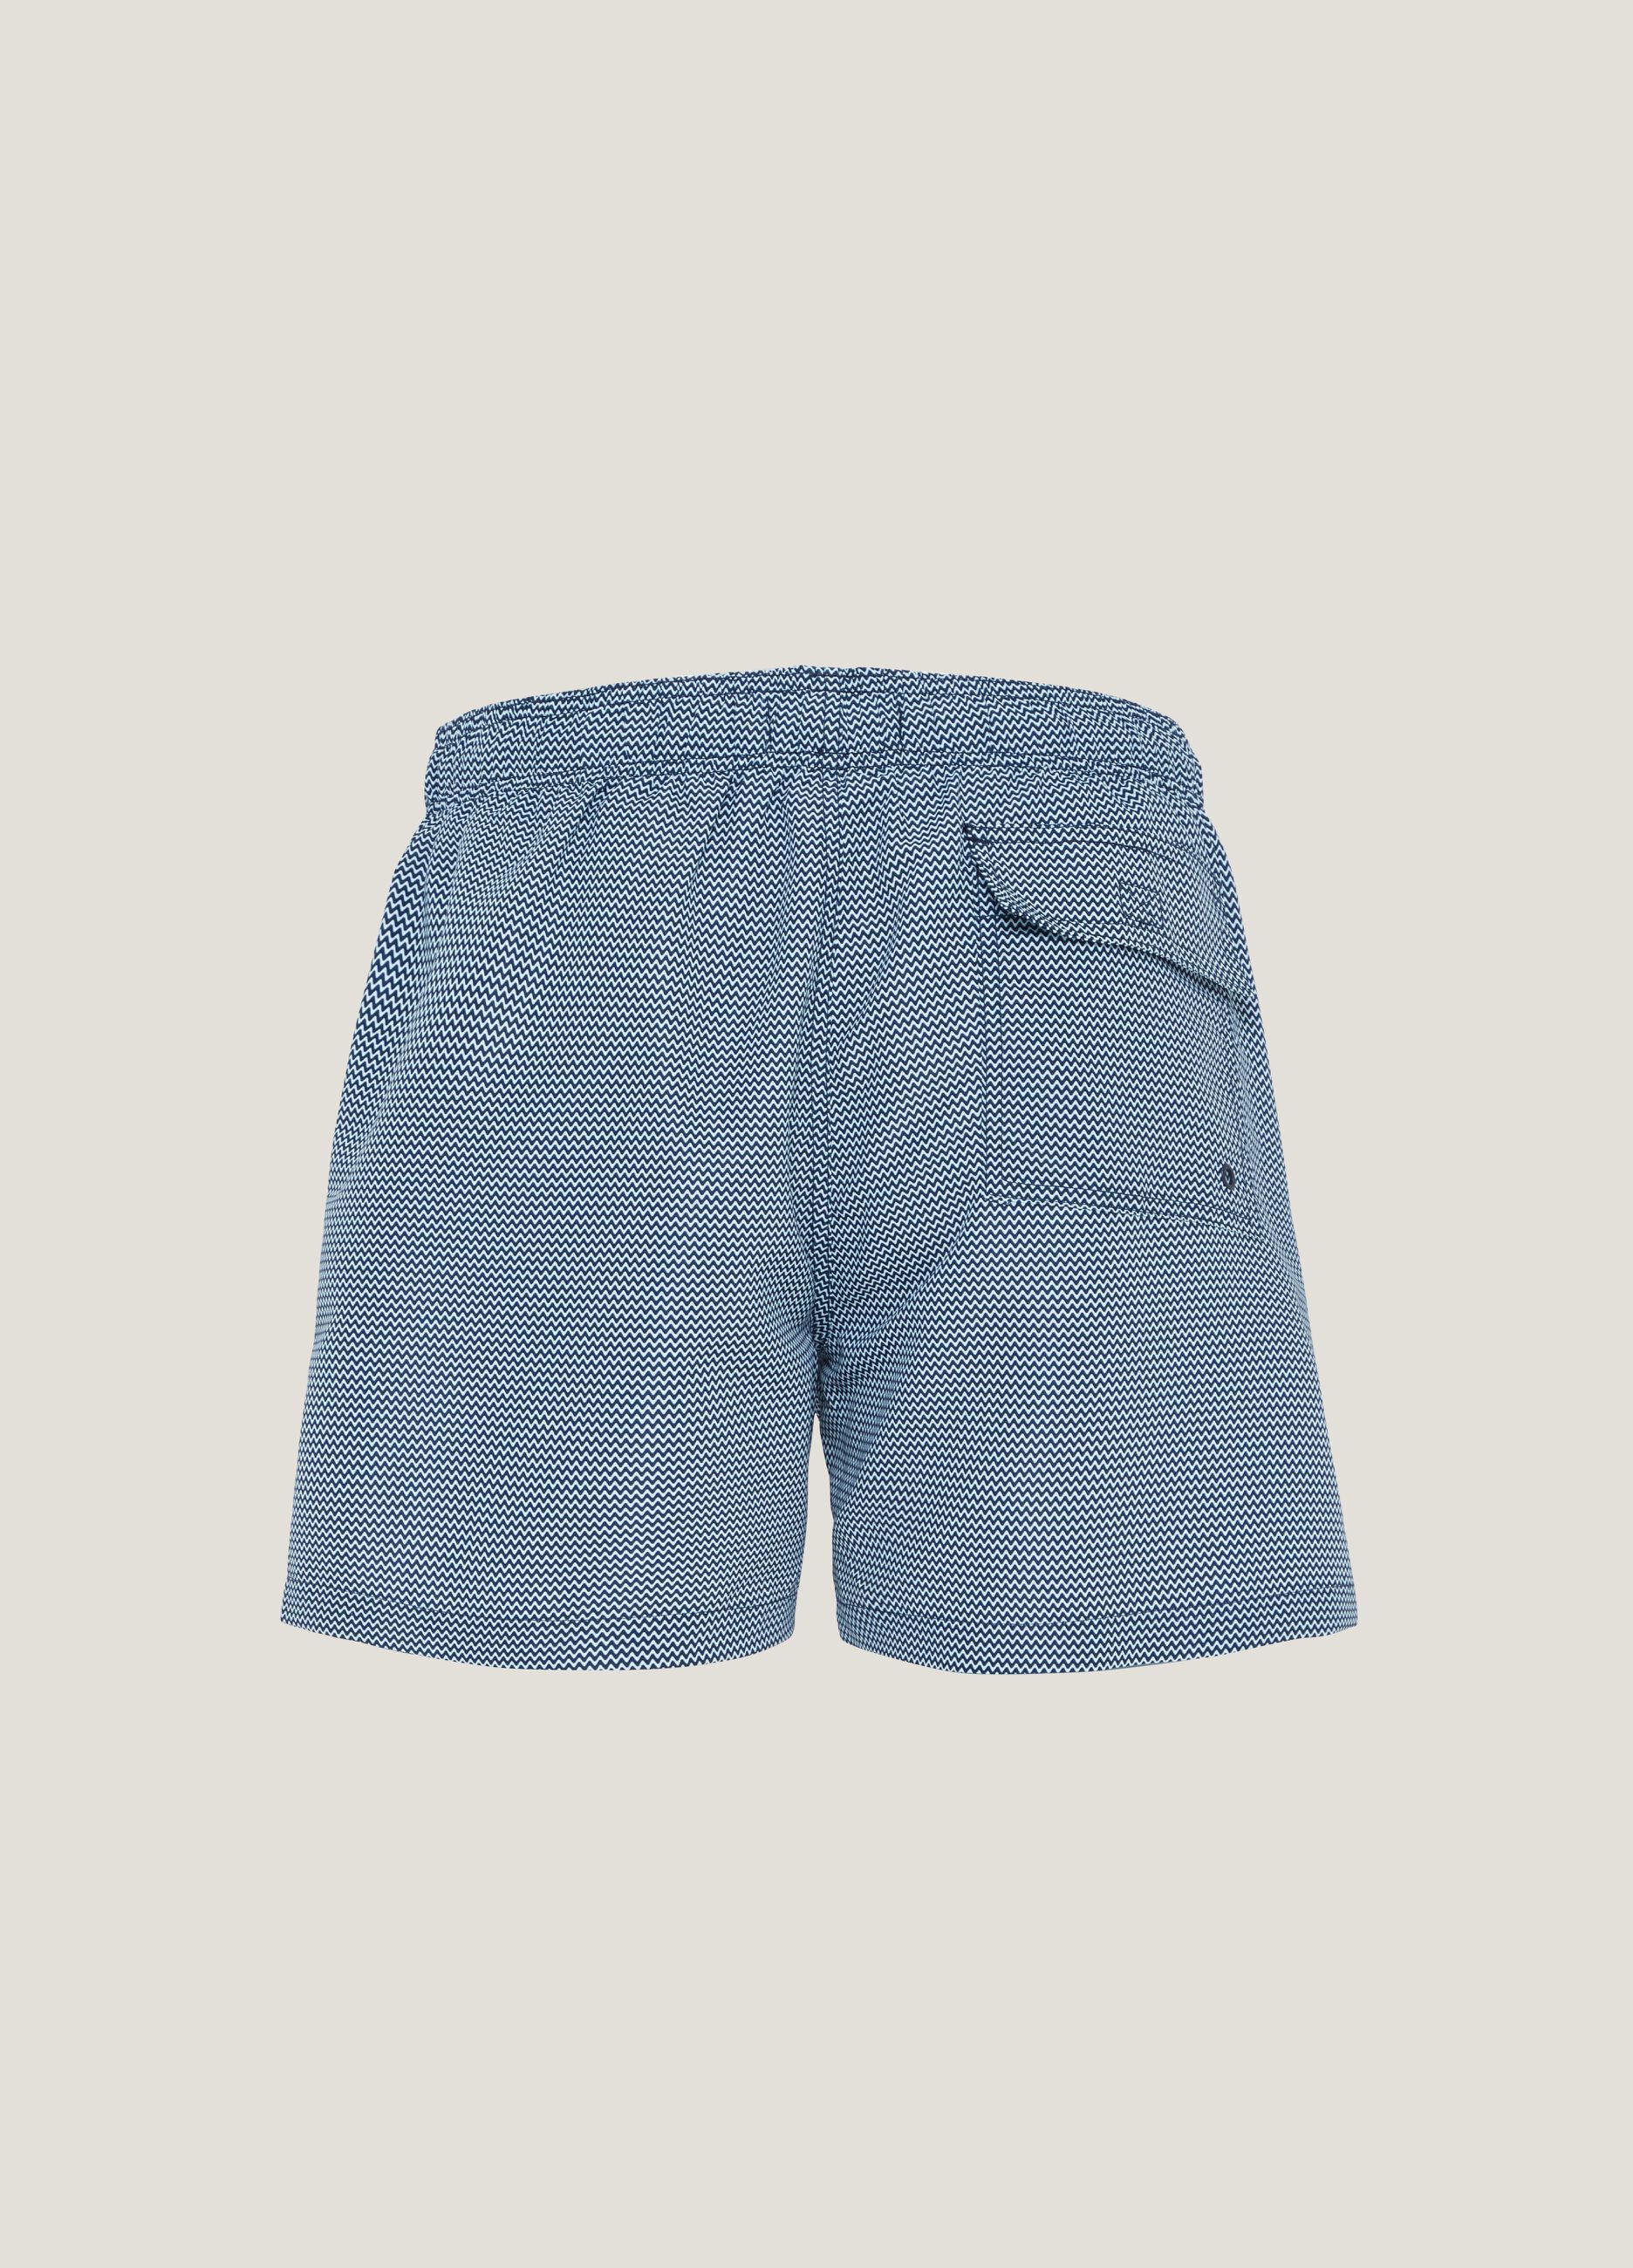 Swimming trunks with waves pattern